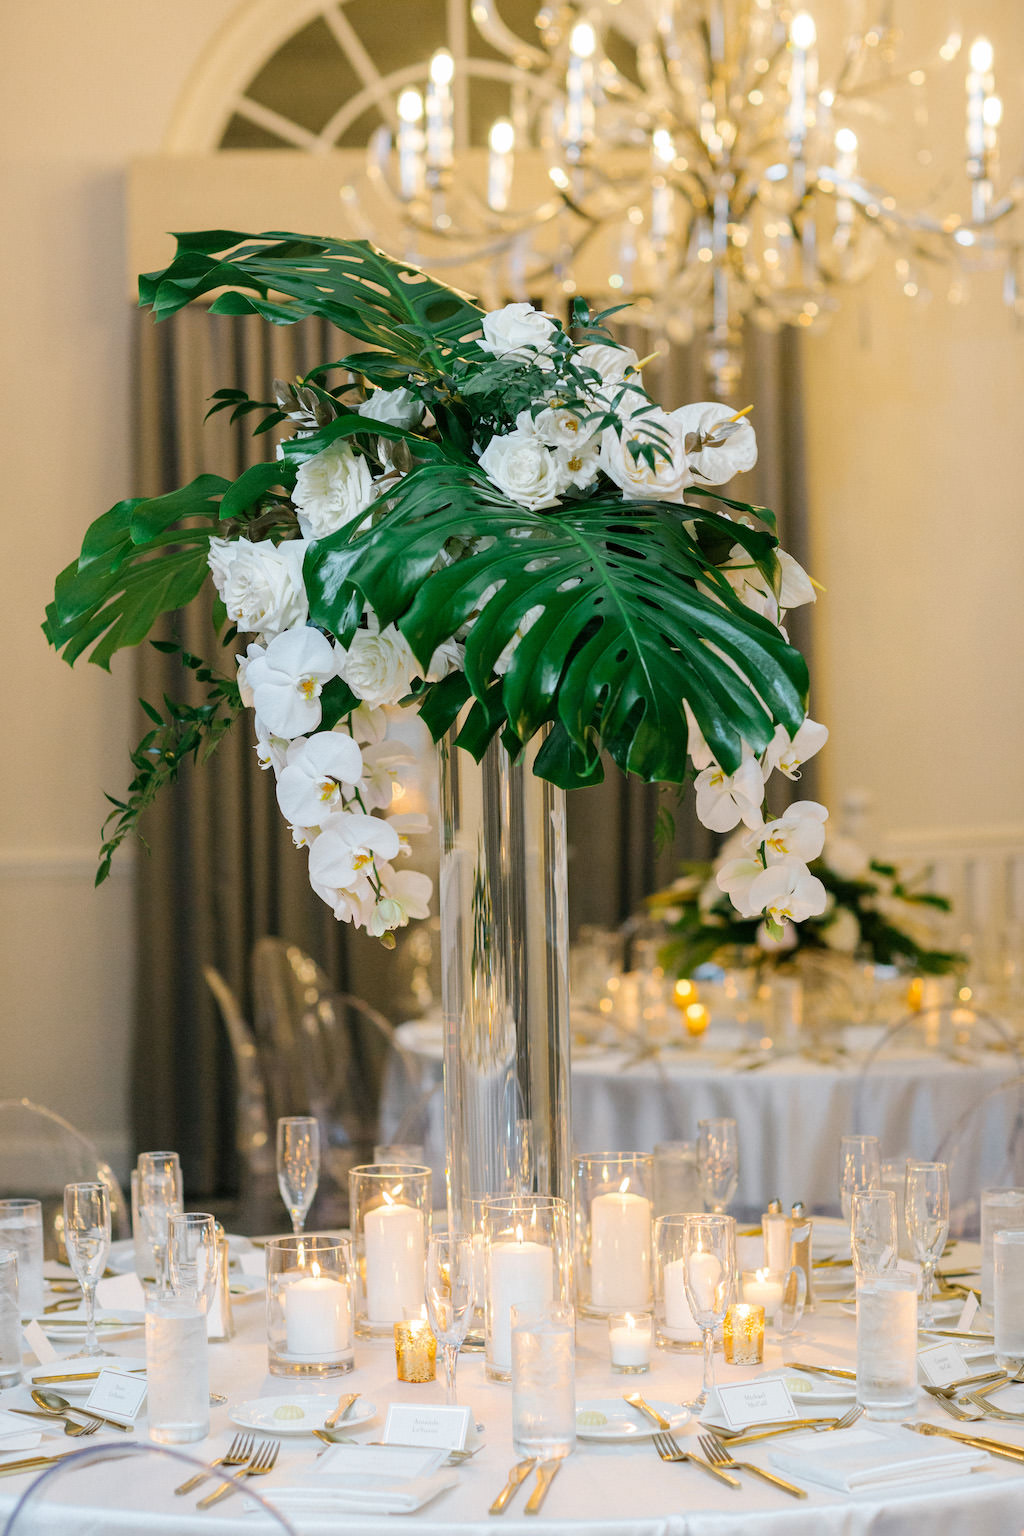 Tropical Modern Elegant Wedding Reception Decor, Tall Glass Cylinder Vase with Monstera Palm Leaf and White Orchids Floral Centerpiece | Tampa Bay Wedding Planner Parties A'La Carte | Wedding Florist Bruce Wayne Florals | Wedding Flatware Rentals from A Chair Affair